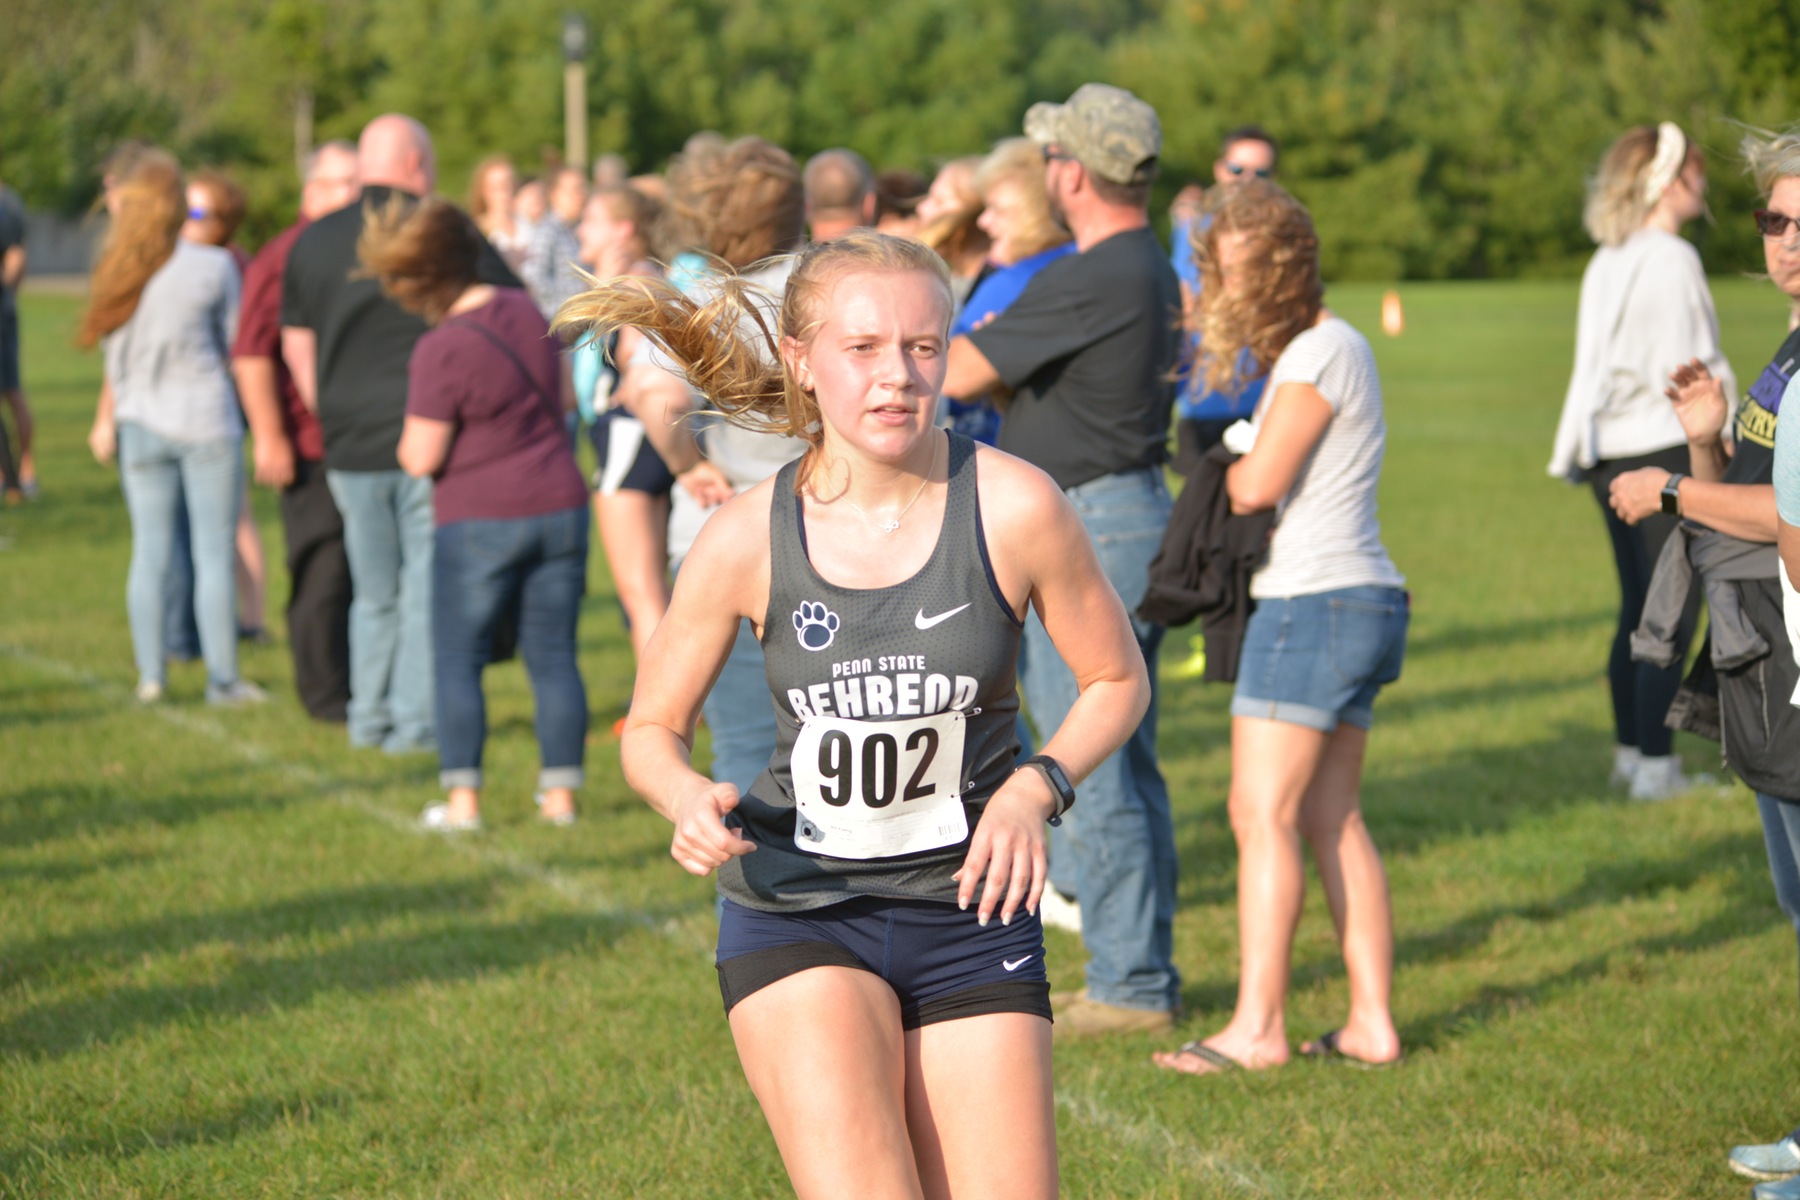 Women's Cross Country Competes in NCAA Mid-East Regional Saturday